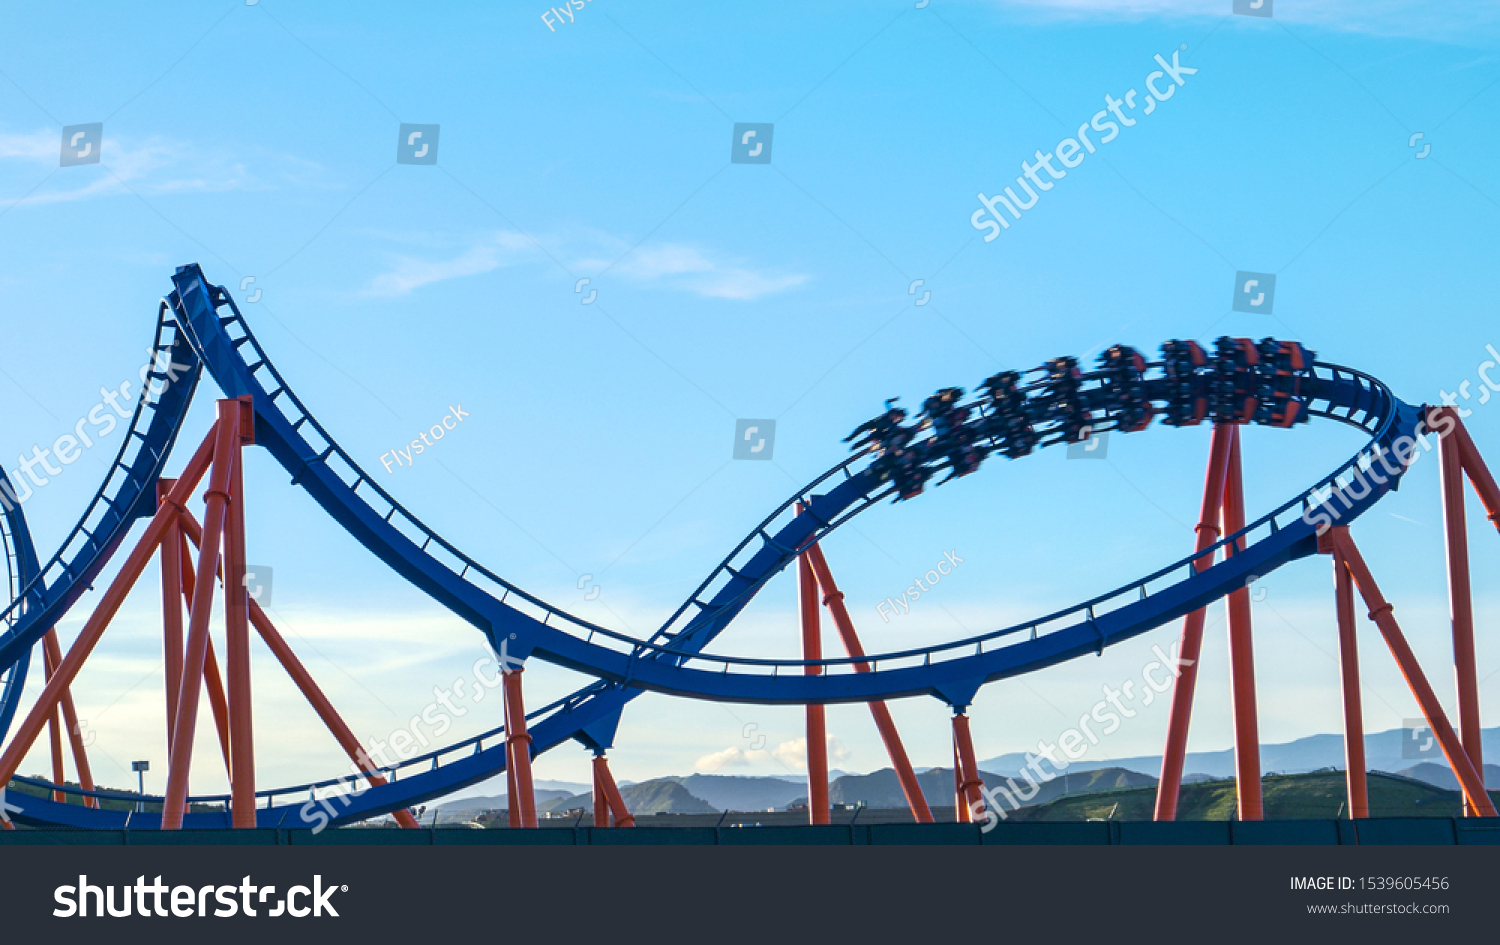 CLOSE UP: Excited tourists are thrown around as the ride the epic roller coaster speeding into a sharp turn. Thrill-seeking tourists ride the fun roller coasters in an amusement park in Los Angeles. #1539605456